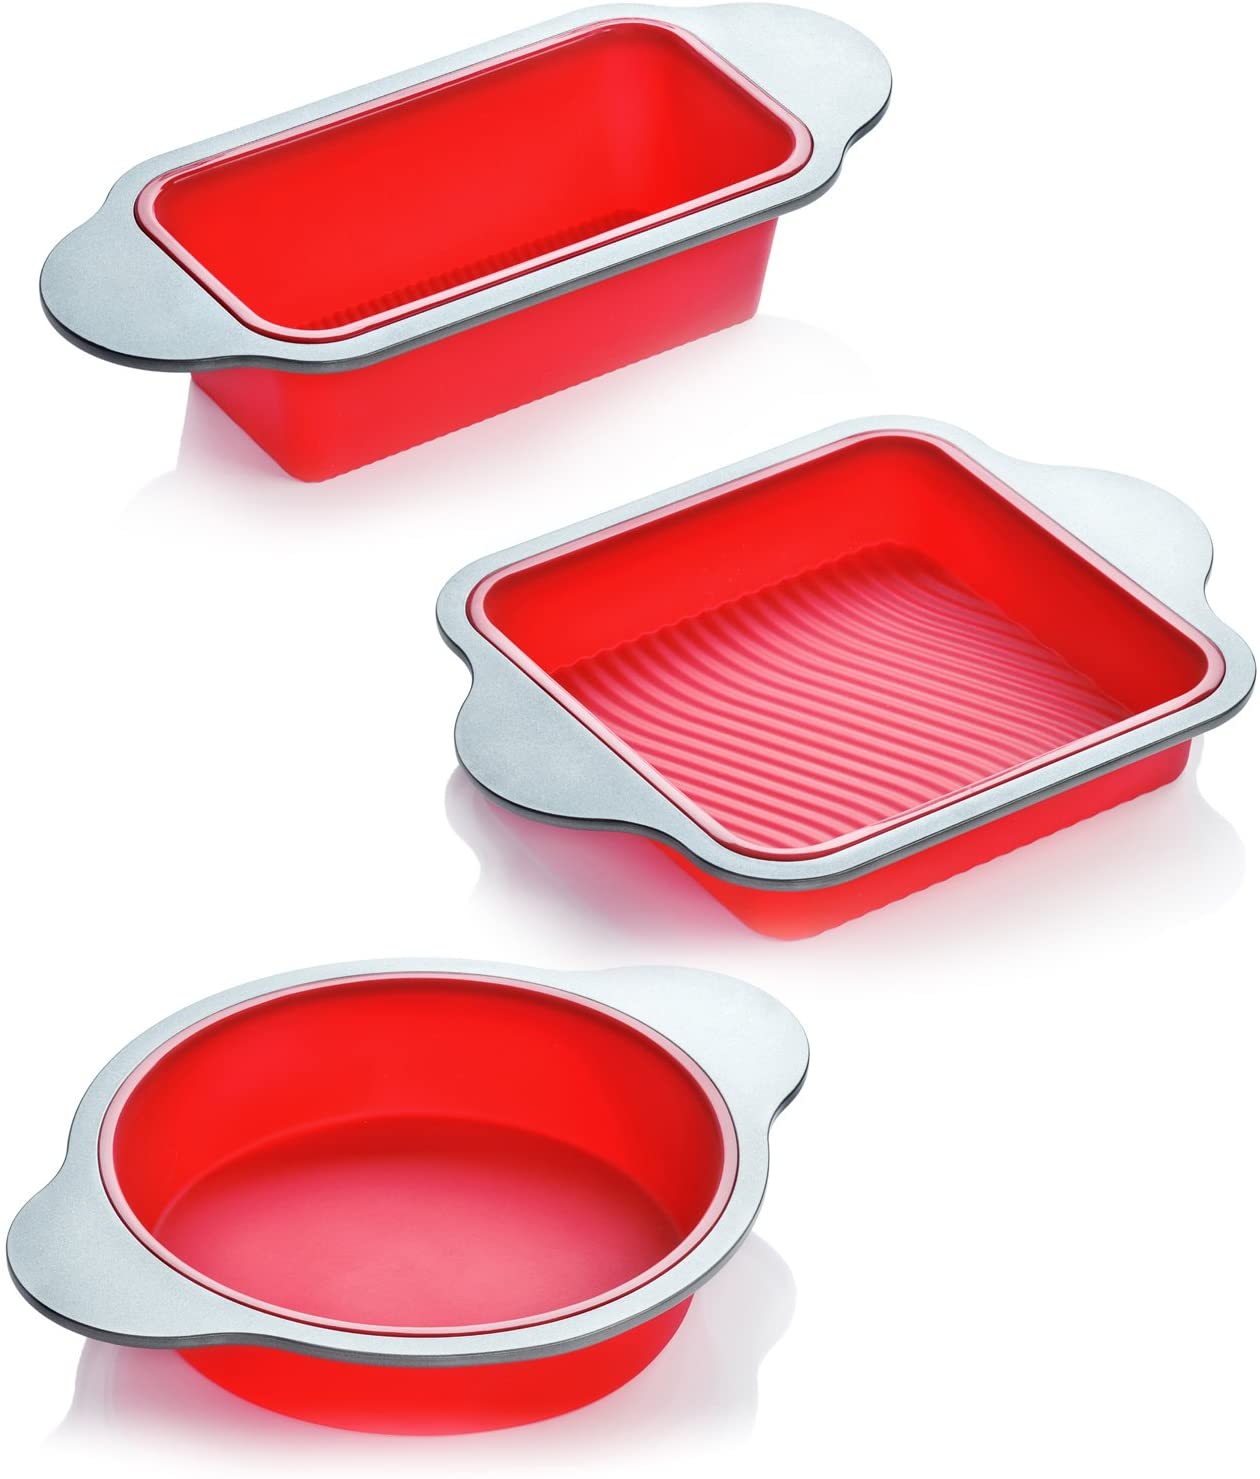 1pc, Silicone Cake Pan (12.28''x10.82''x3.74''), Baking Cake Mold, Easy To  Slice Baking Pan, Oven Accessories, Baking Tools, Kitchen Gadgets, Kitchen